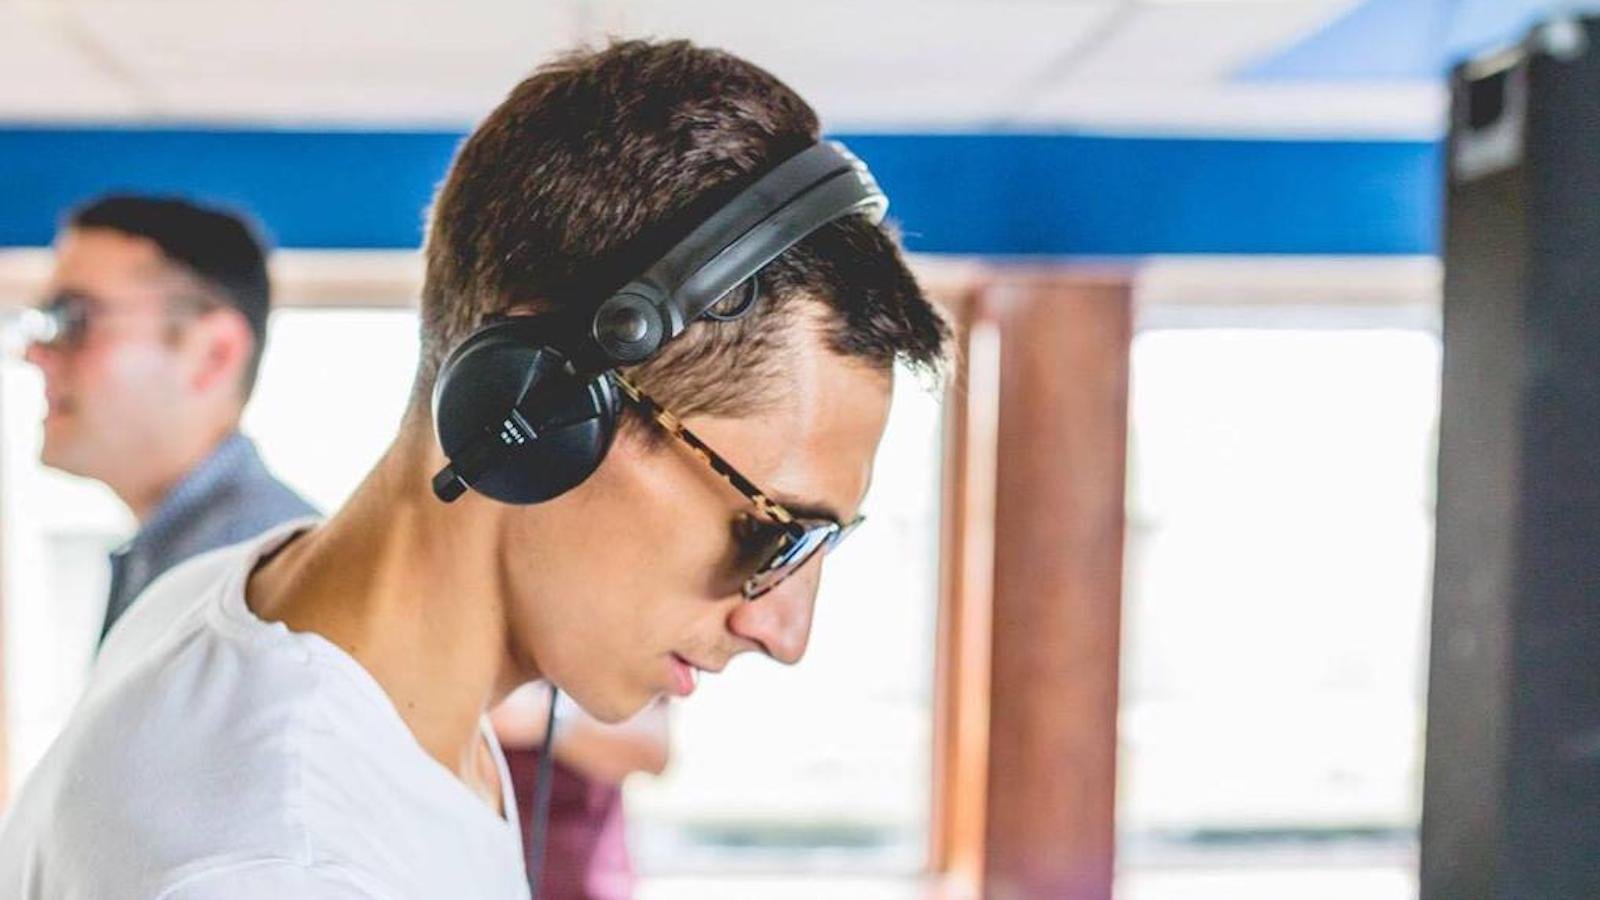 Sennheiser HD 25 lightweight headphones are comfortable to wear for long periods of time